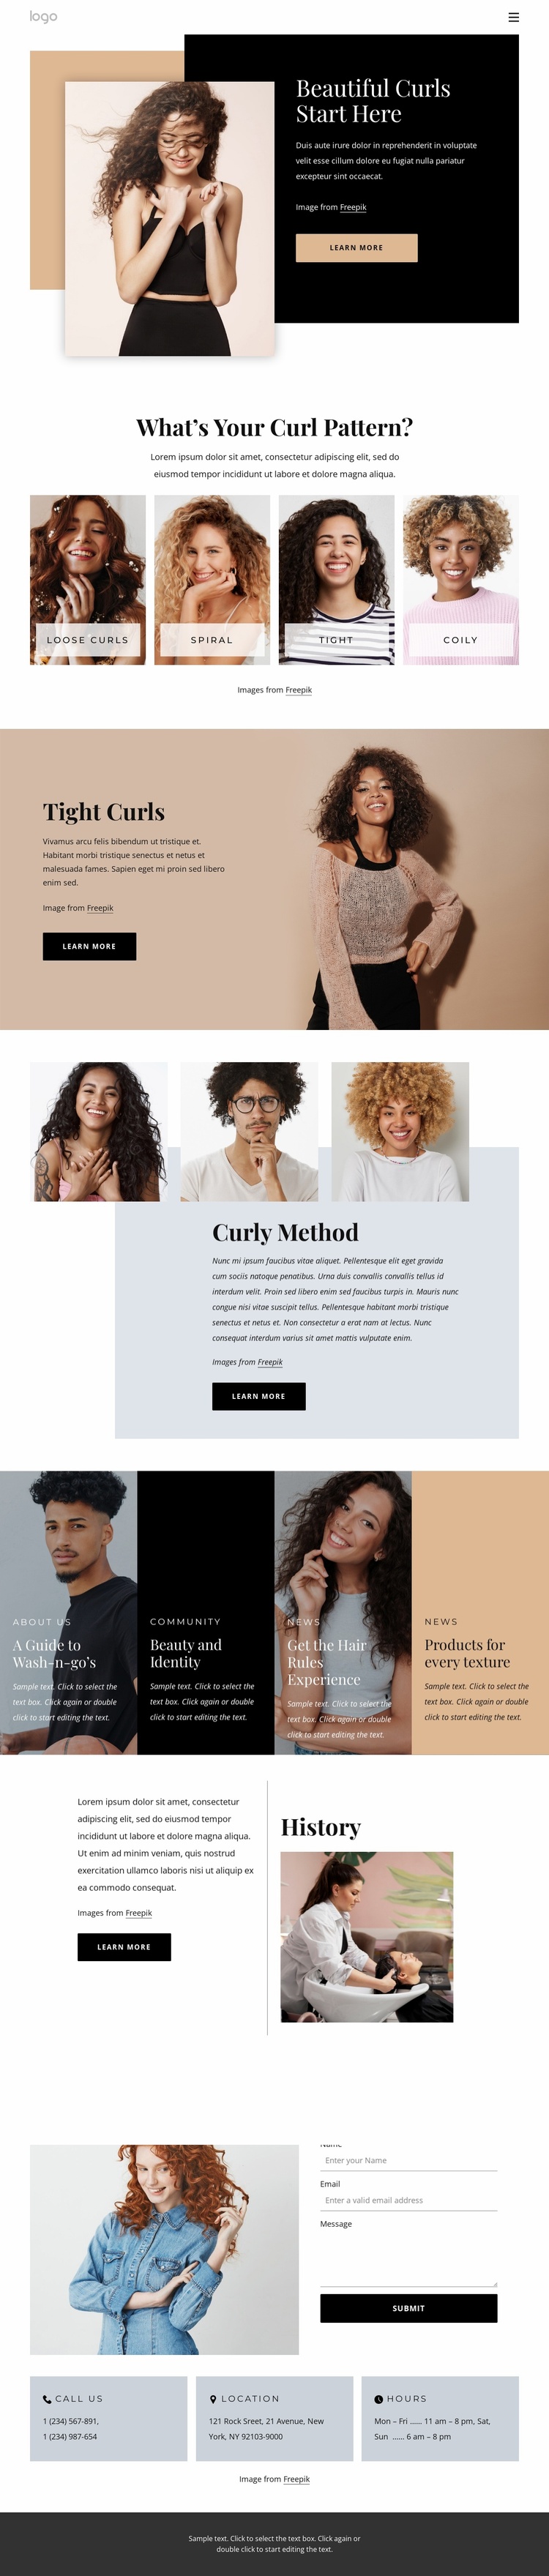 Bring out the best in your curls Website Template